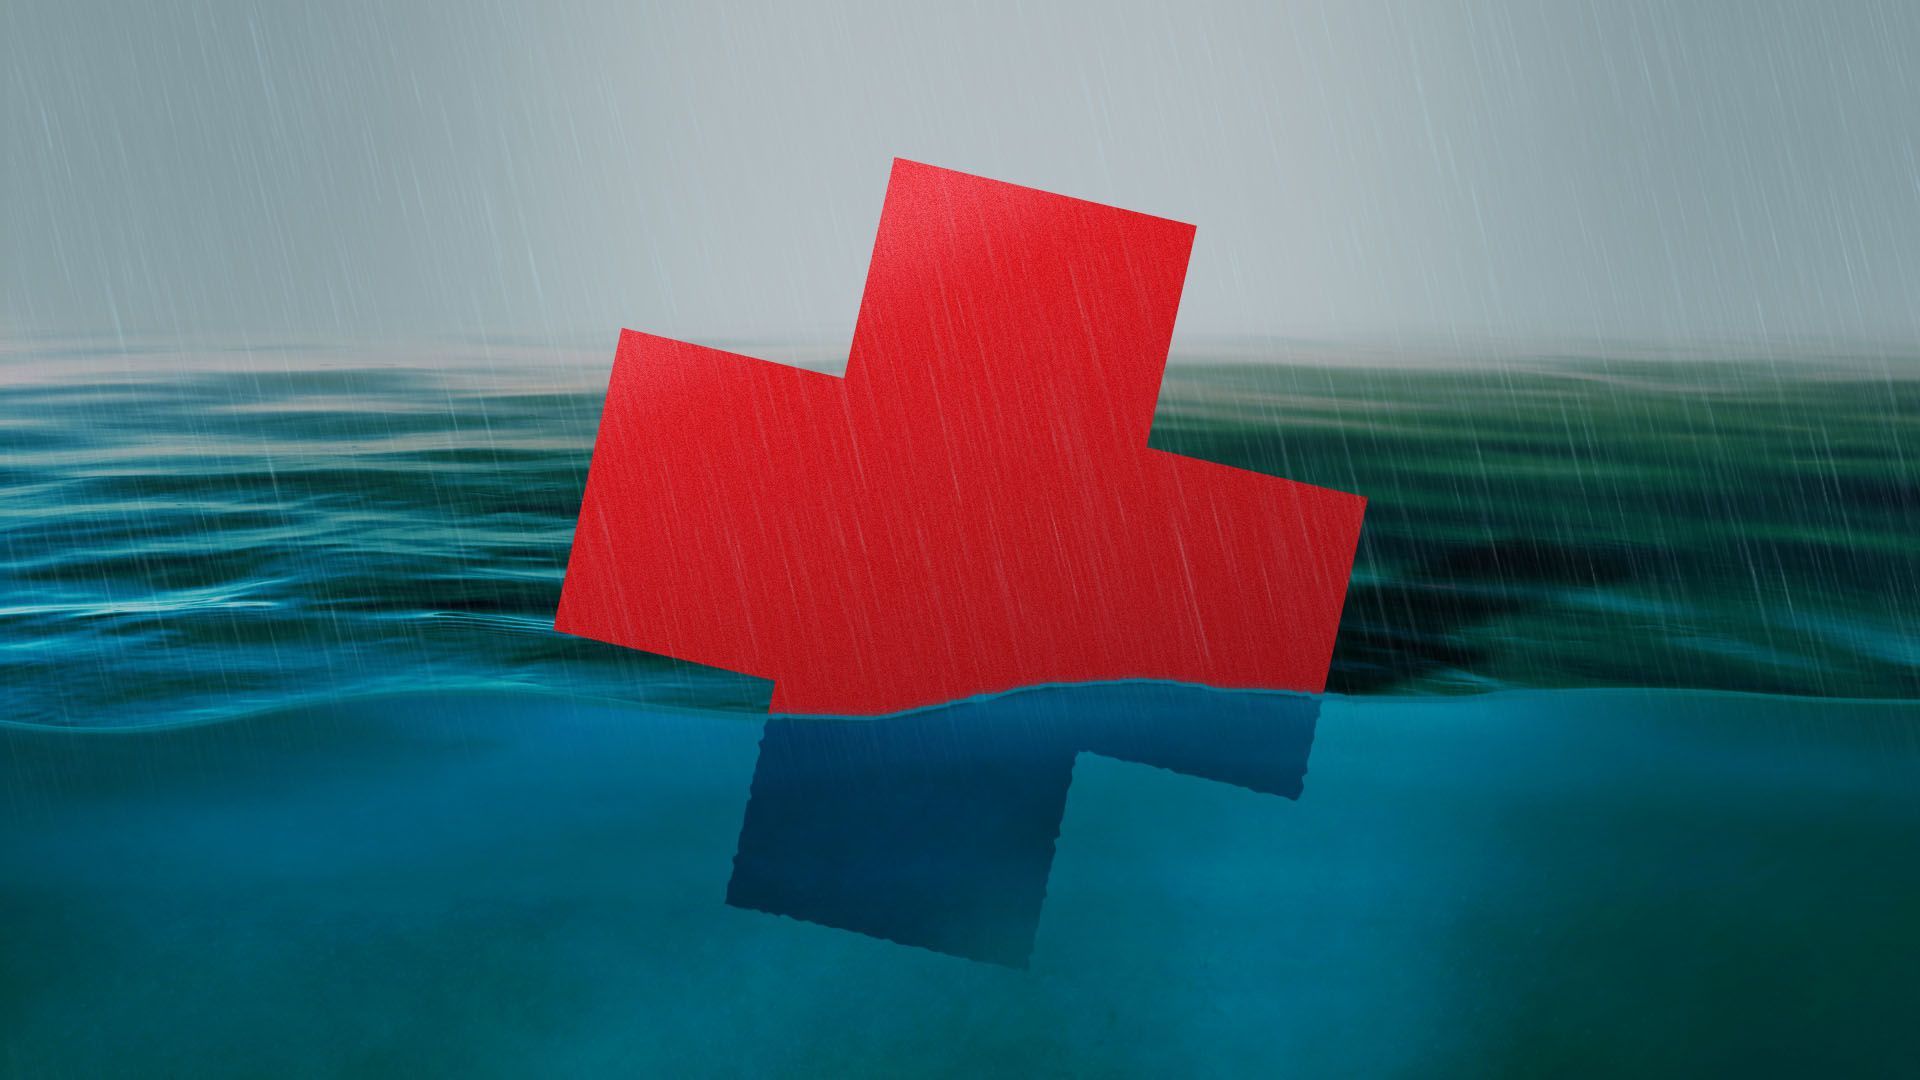 Illustration of a red cross floating in water in a downpour